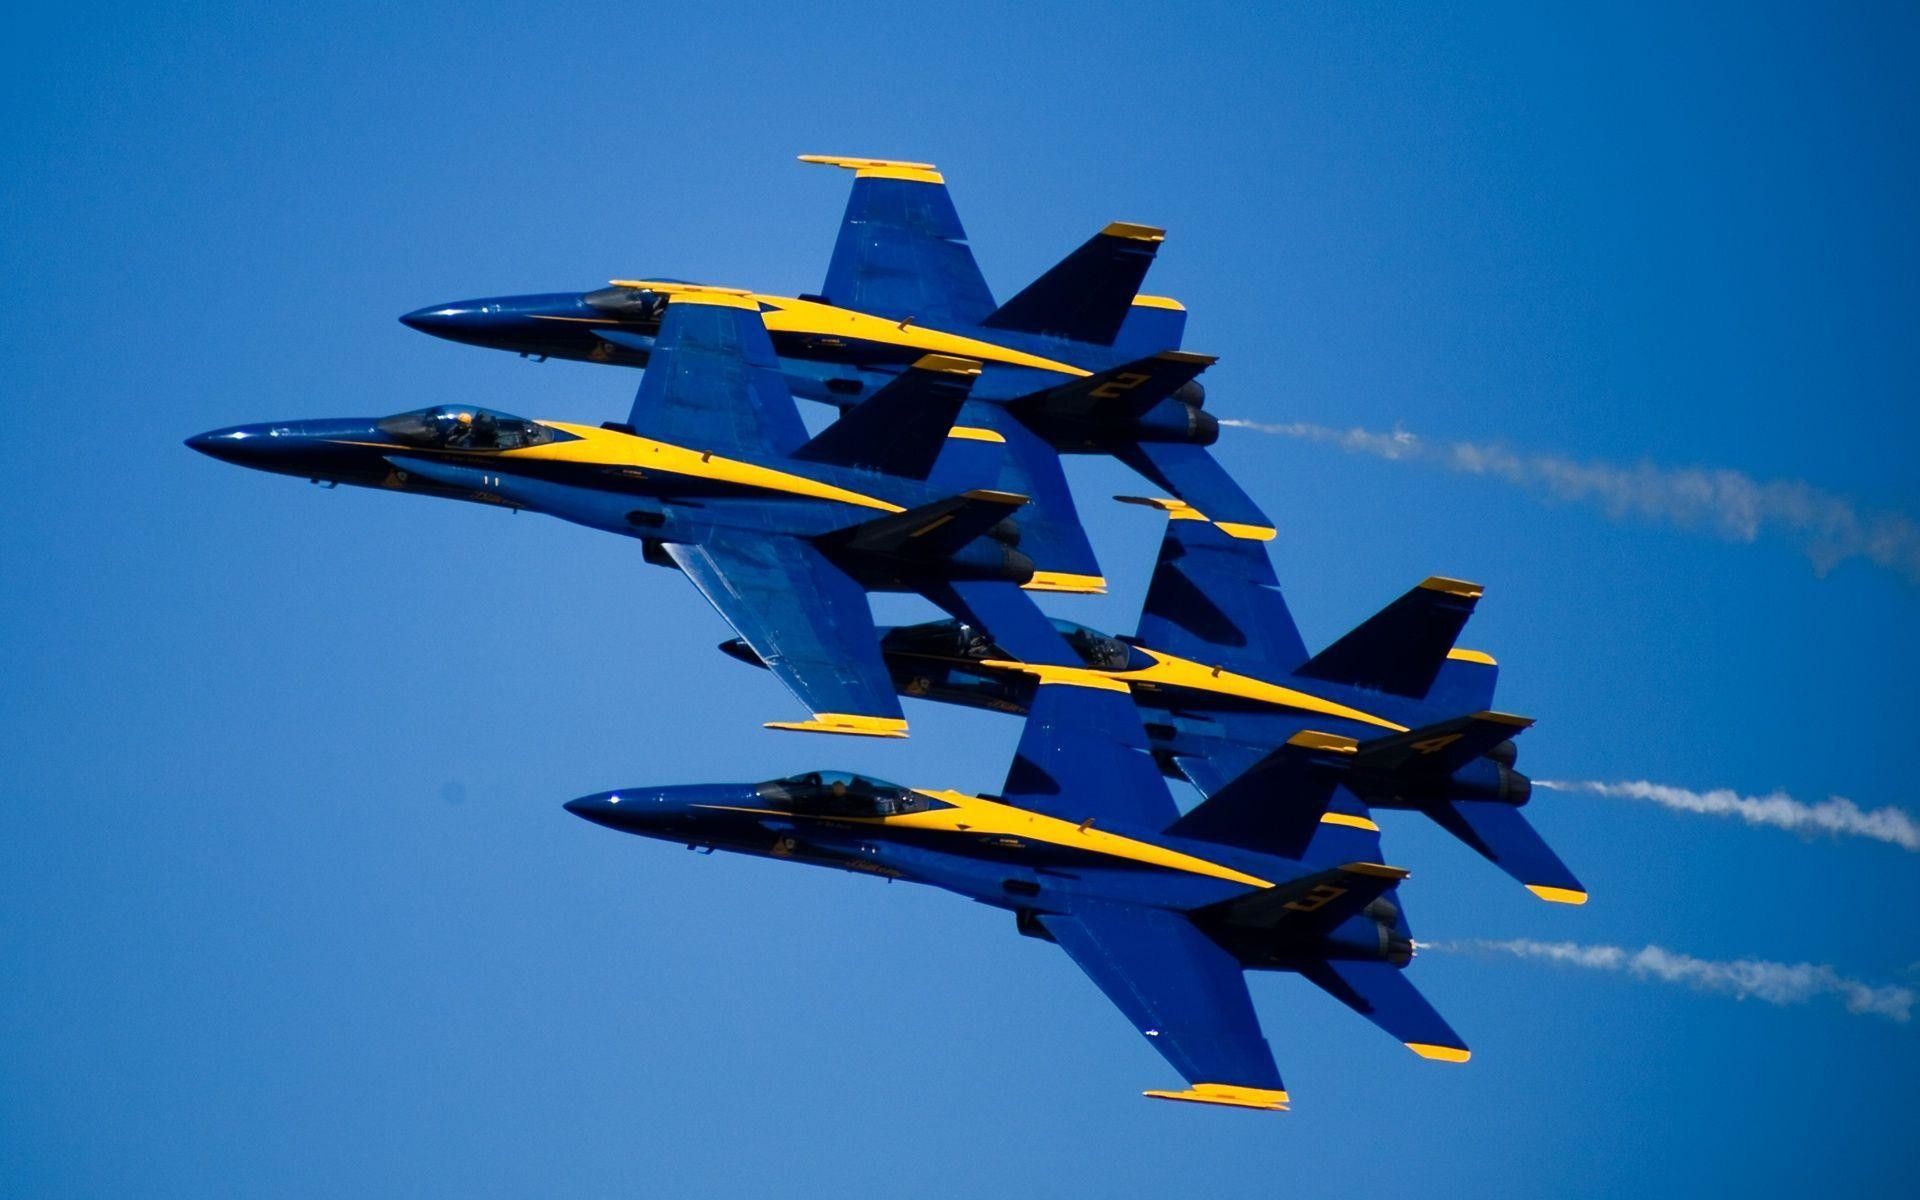 blue angels HD wallpapers backgrounds